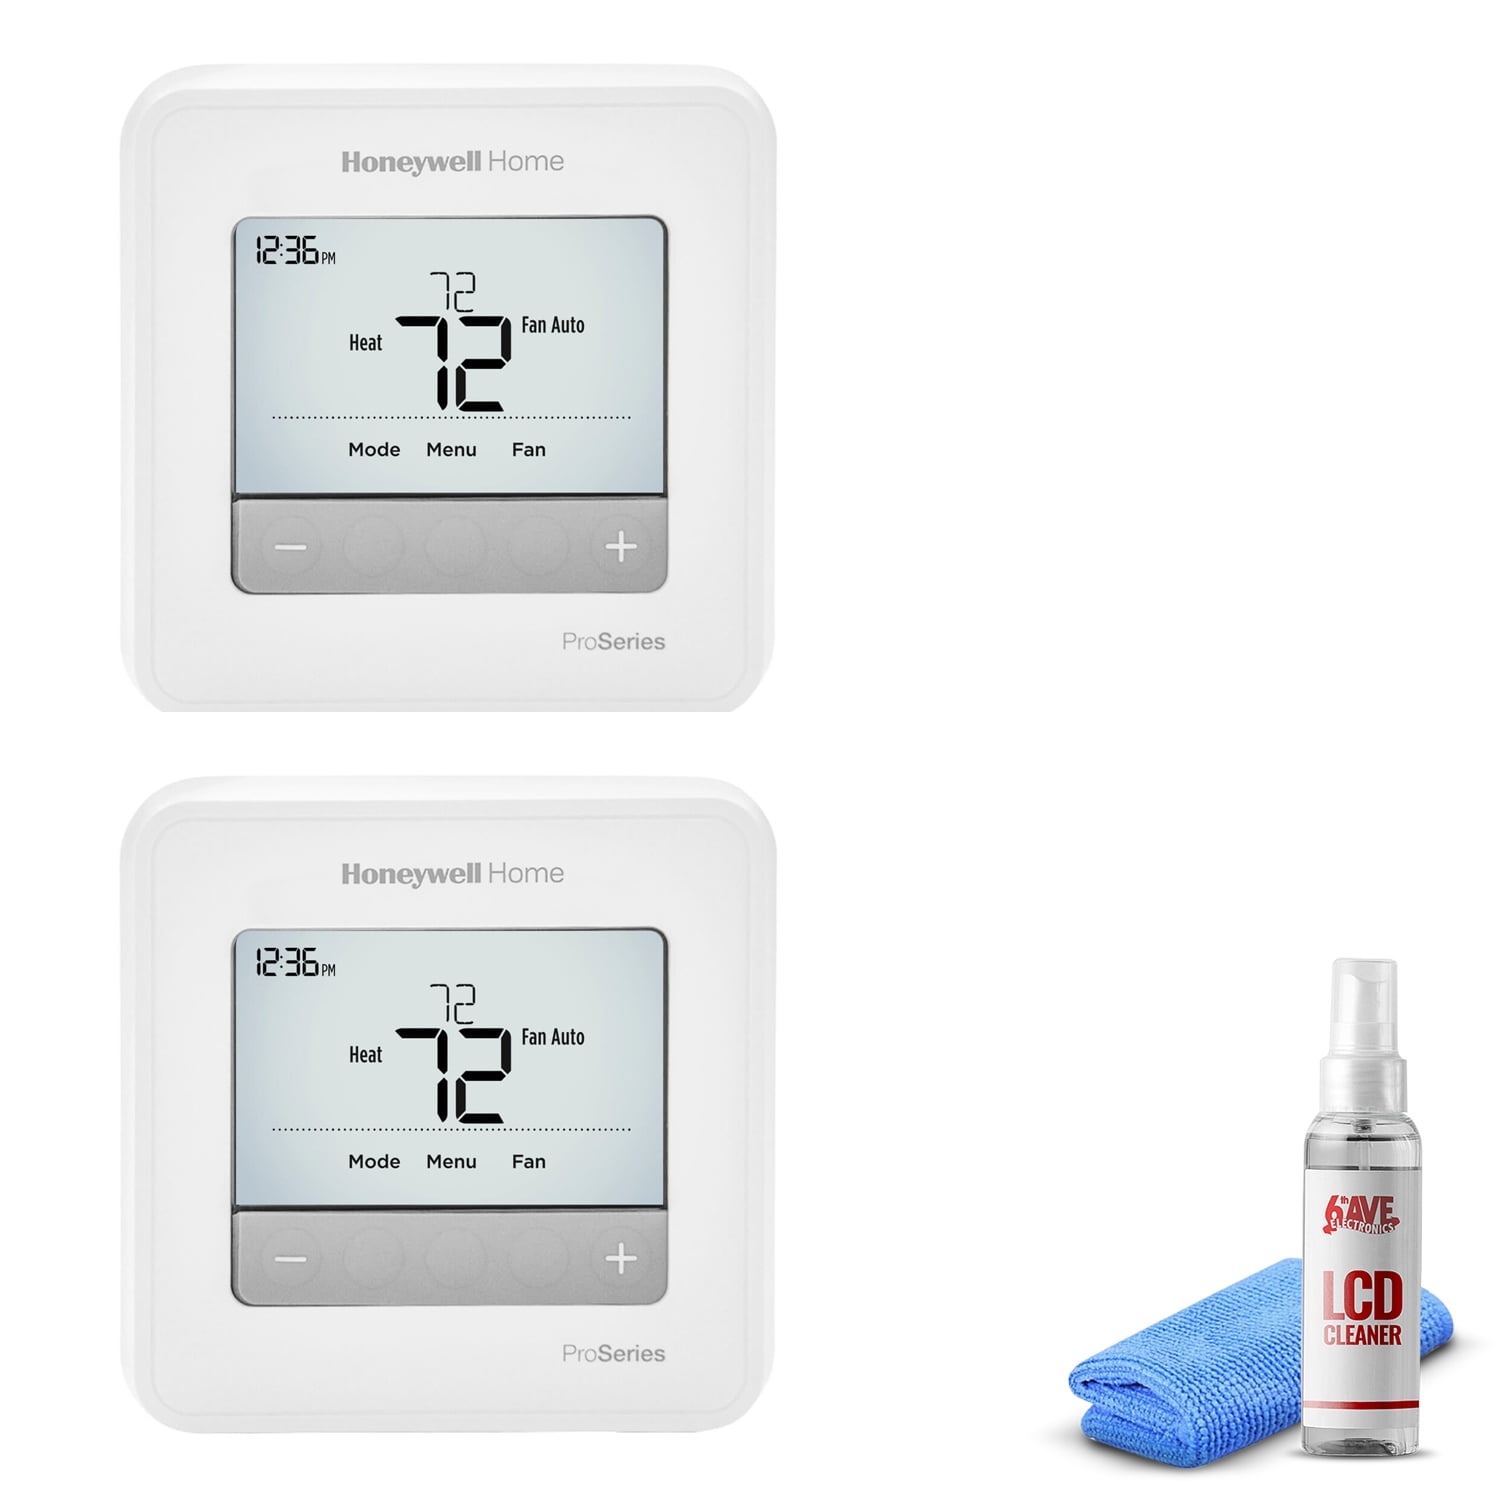 Honeywell Home Pro Series Programmable Wall Mount Thermostat